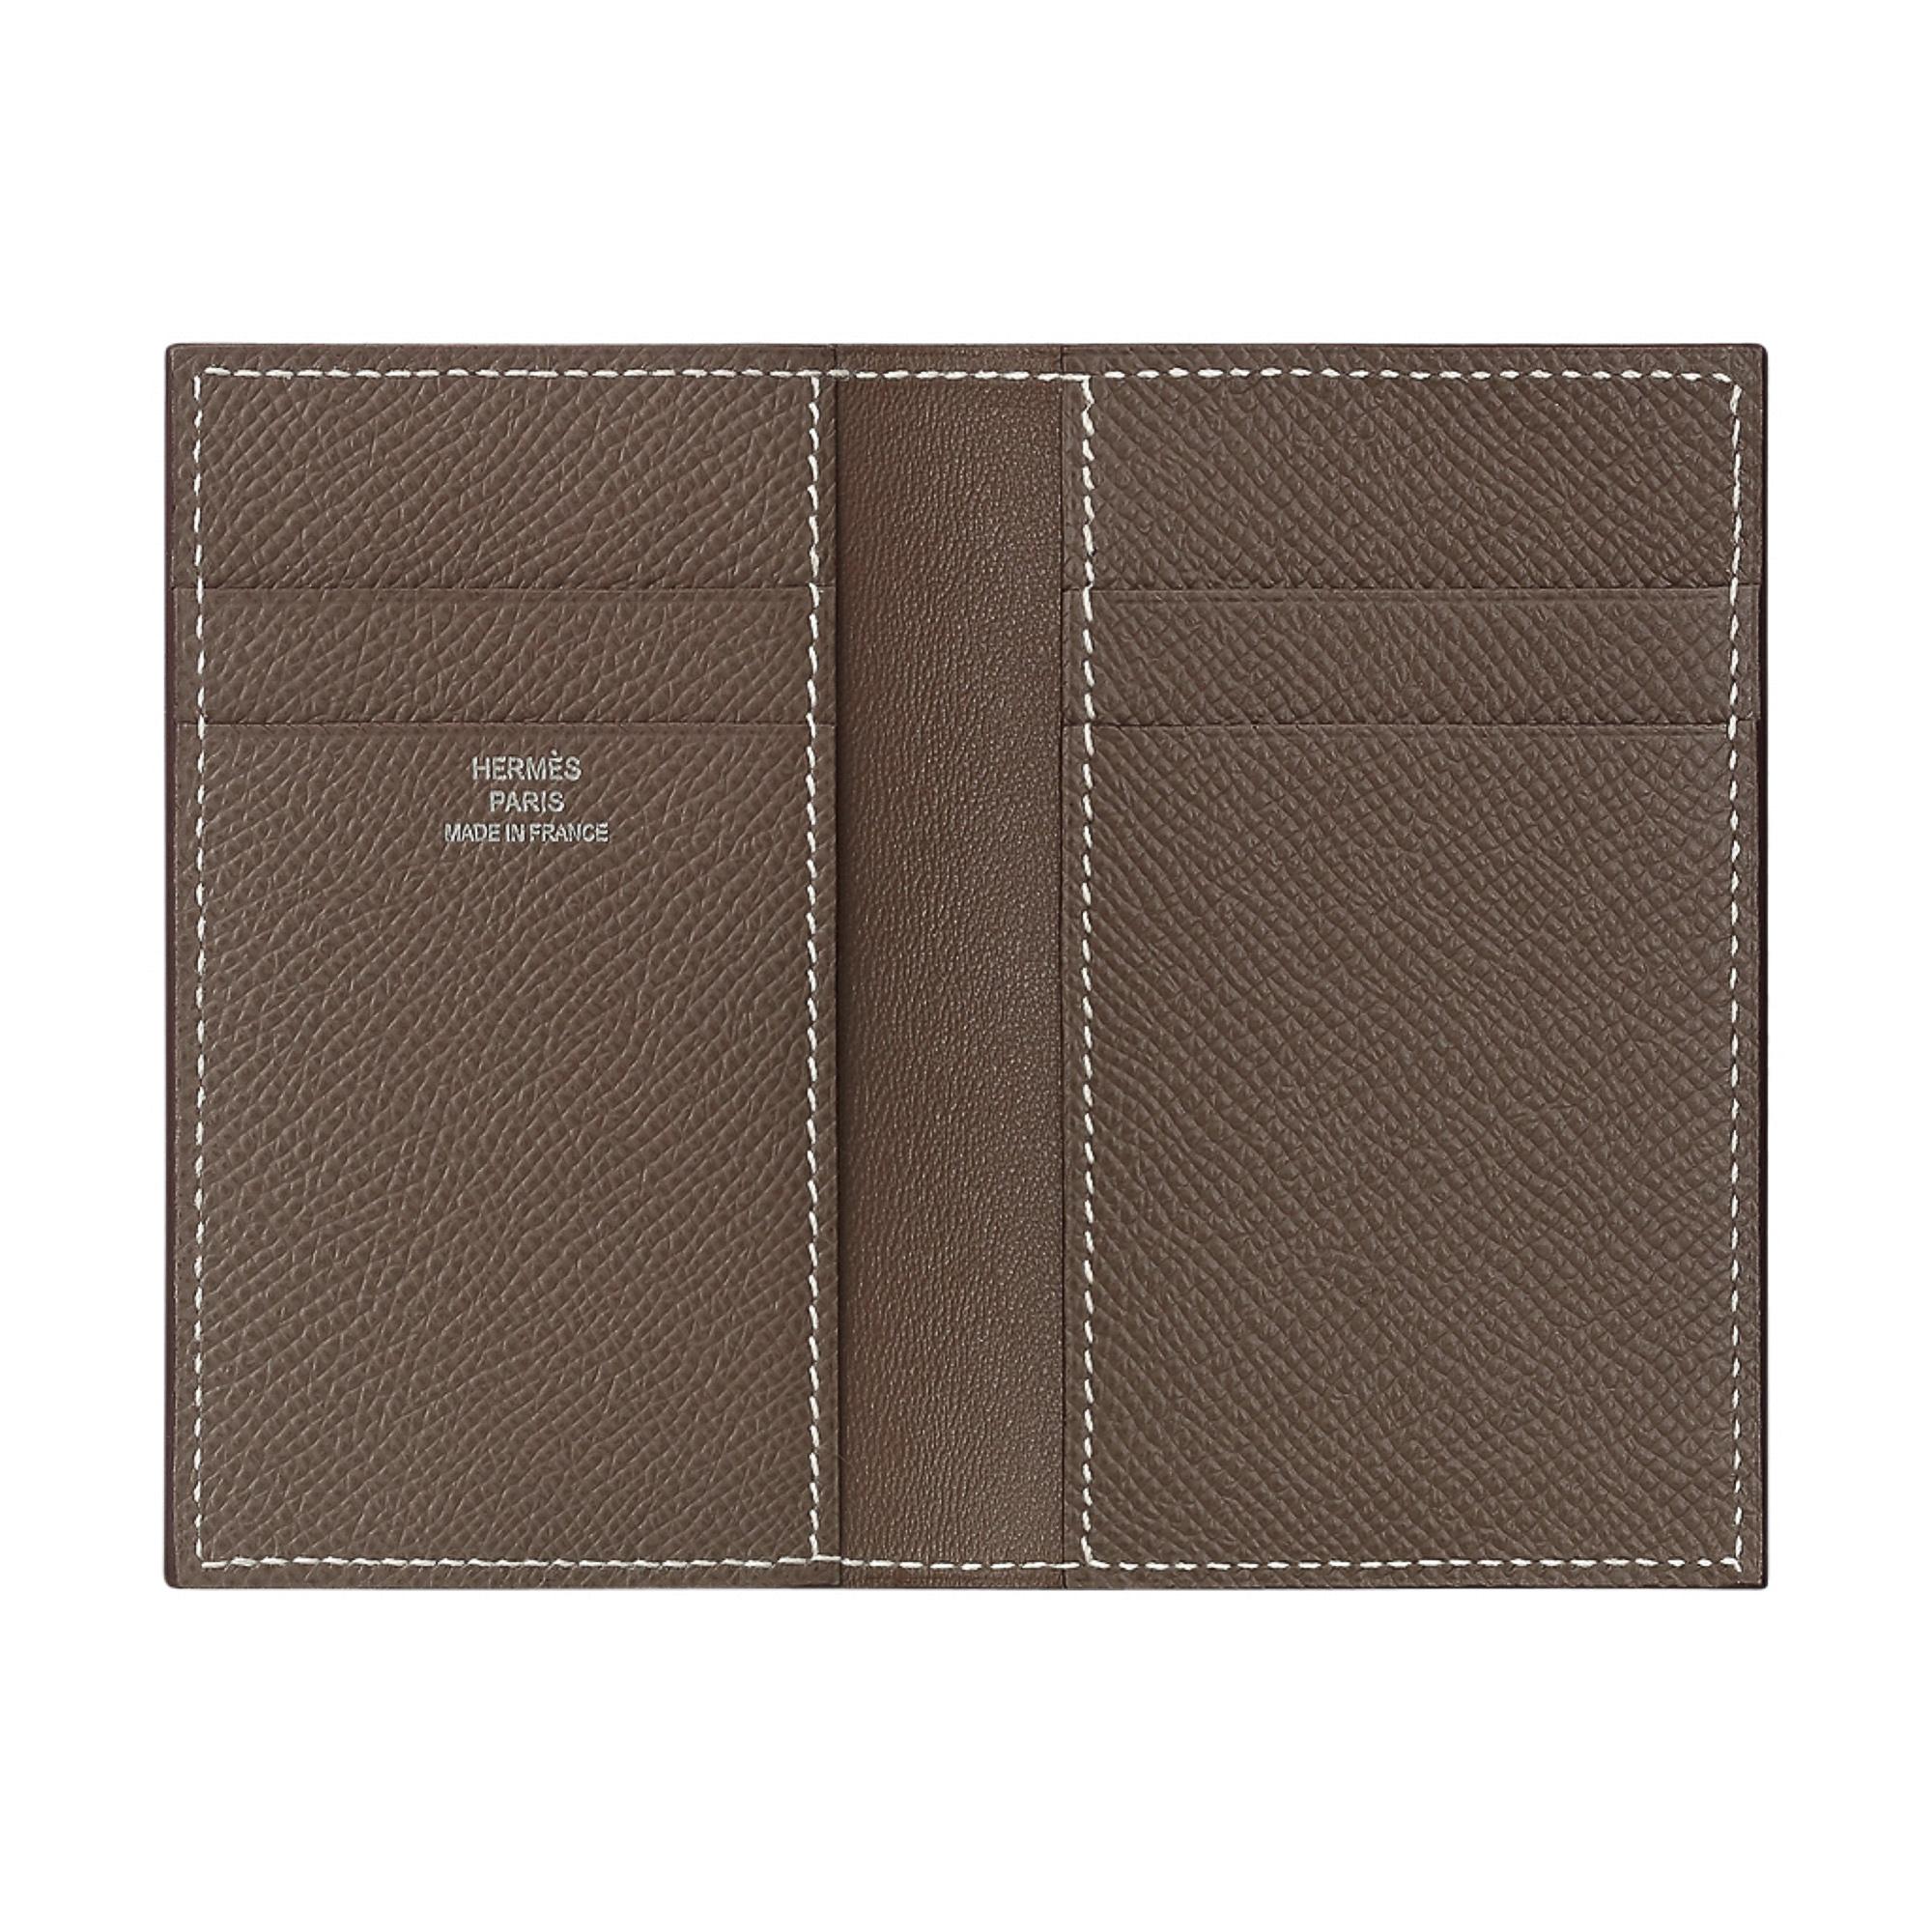 Mightychic offers an Hermes MC2 Jungle Euclid Card Holder featured in Etoupe.
Epsom leather.
The card holder has 4 slots for business/credit cards and 2 pockets.
Comes with signature Hermes box.
New or Store Fresh Condition.
final sale

CARD HOLDER